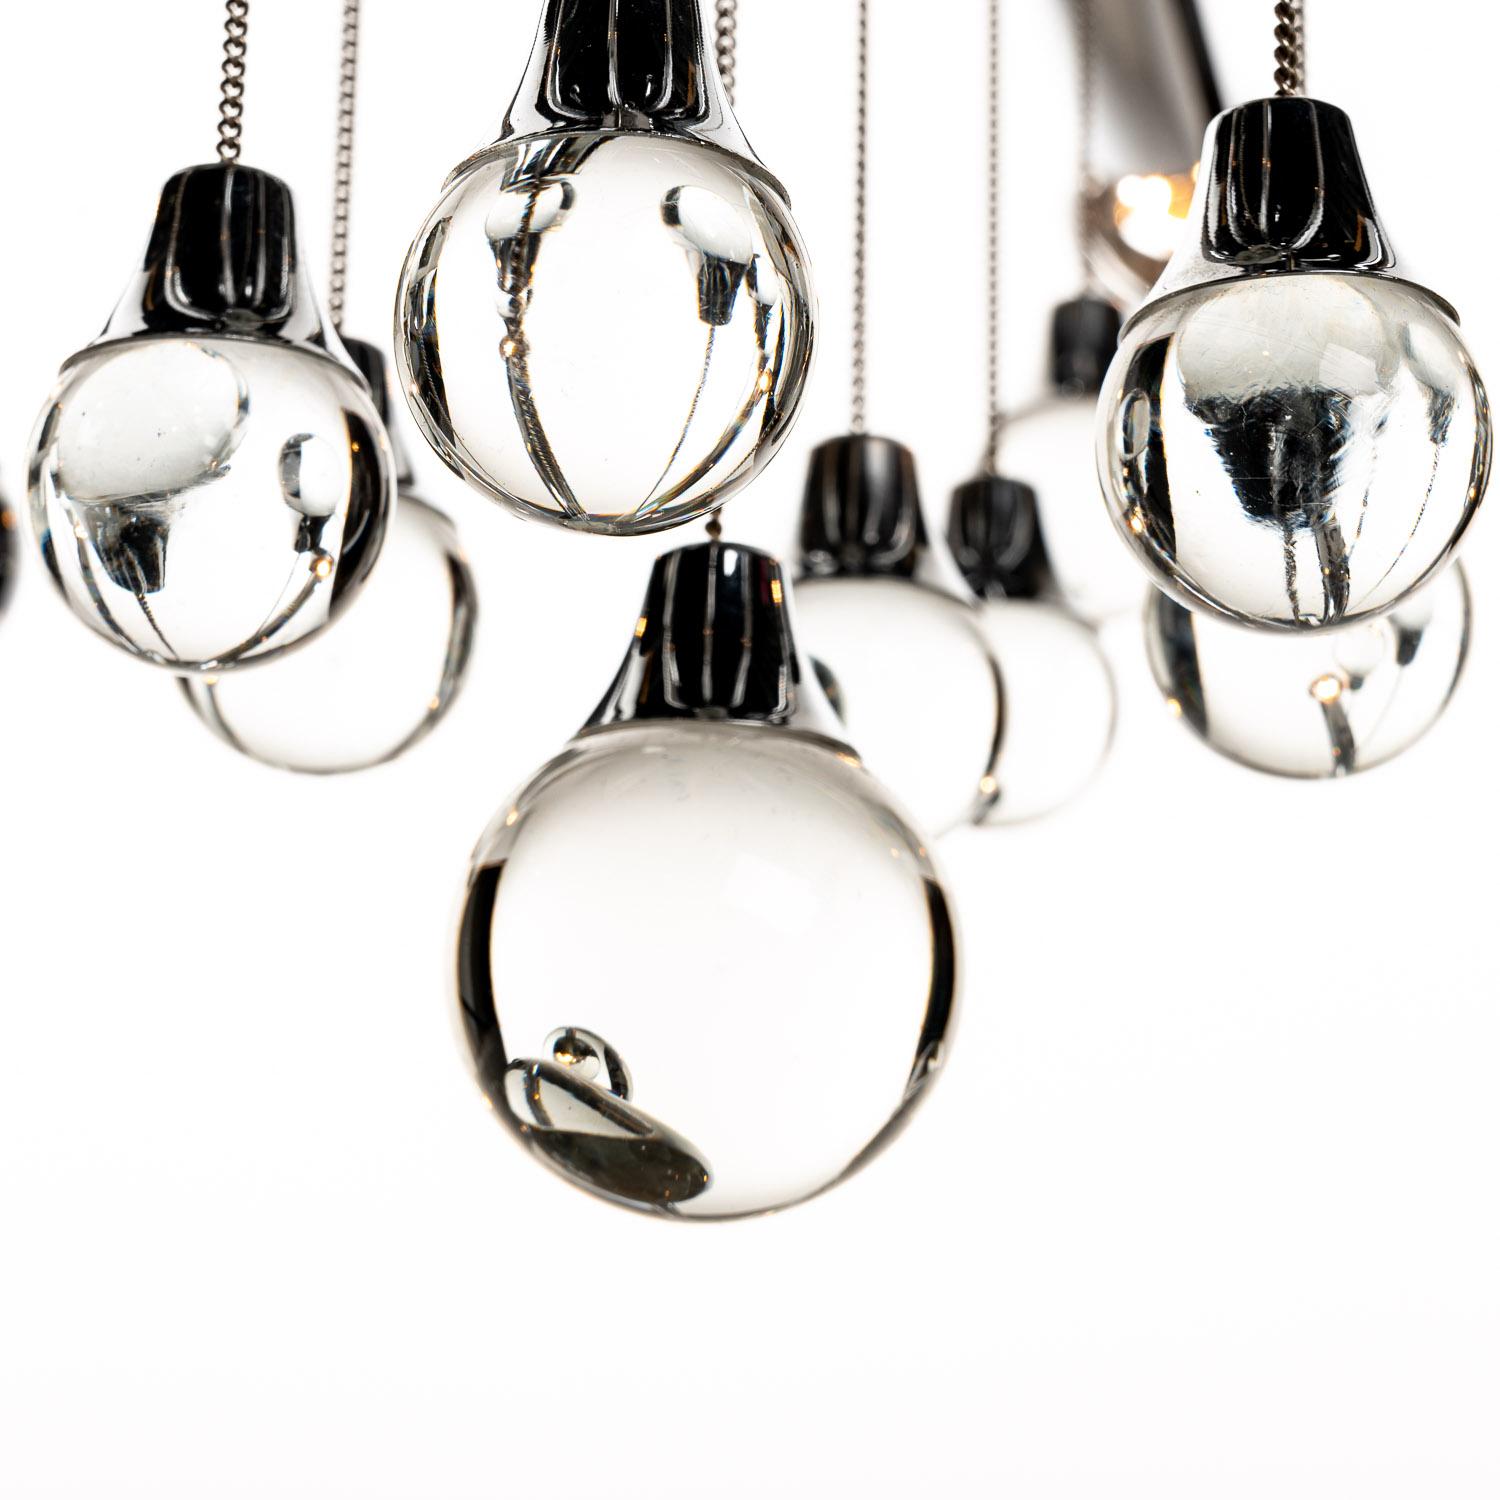 1970s Chrome and Glass Chandelier by Sciolari  For Sale 5